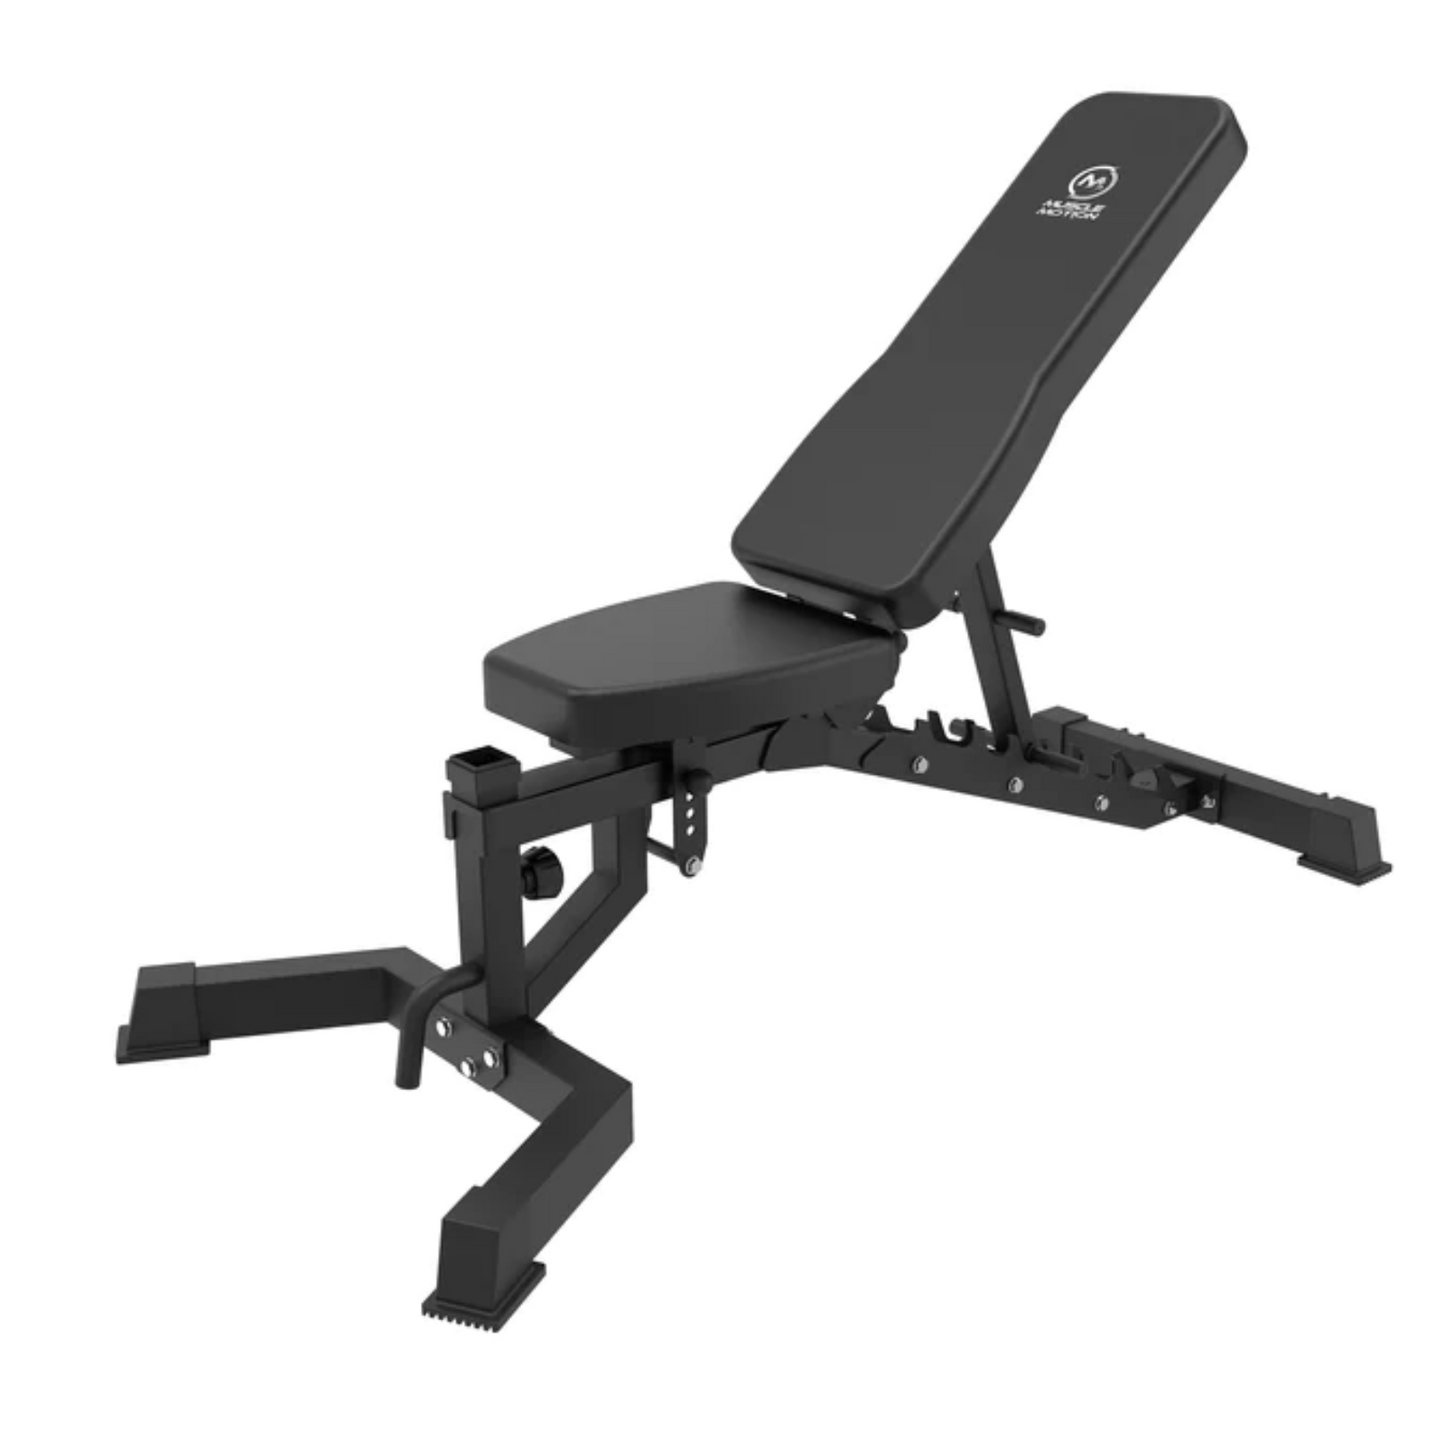 Muscle Motion AB1013 Bench with Leg Extension Attachment